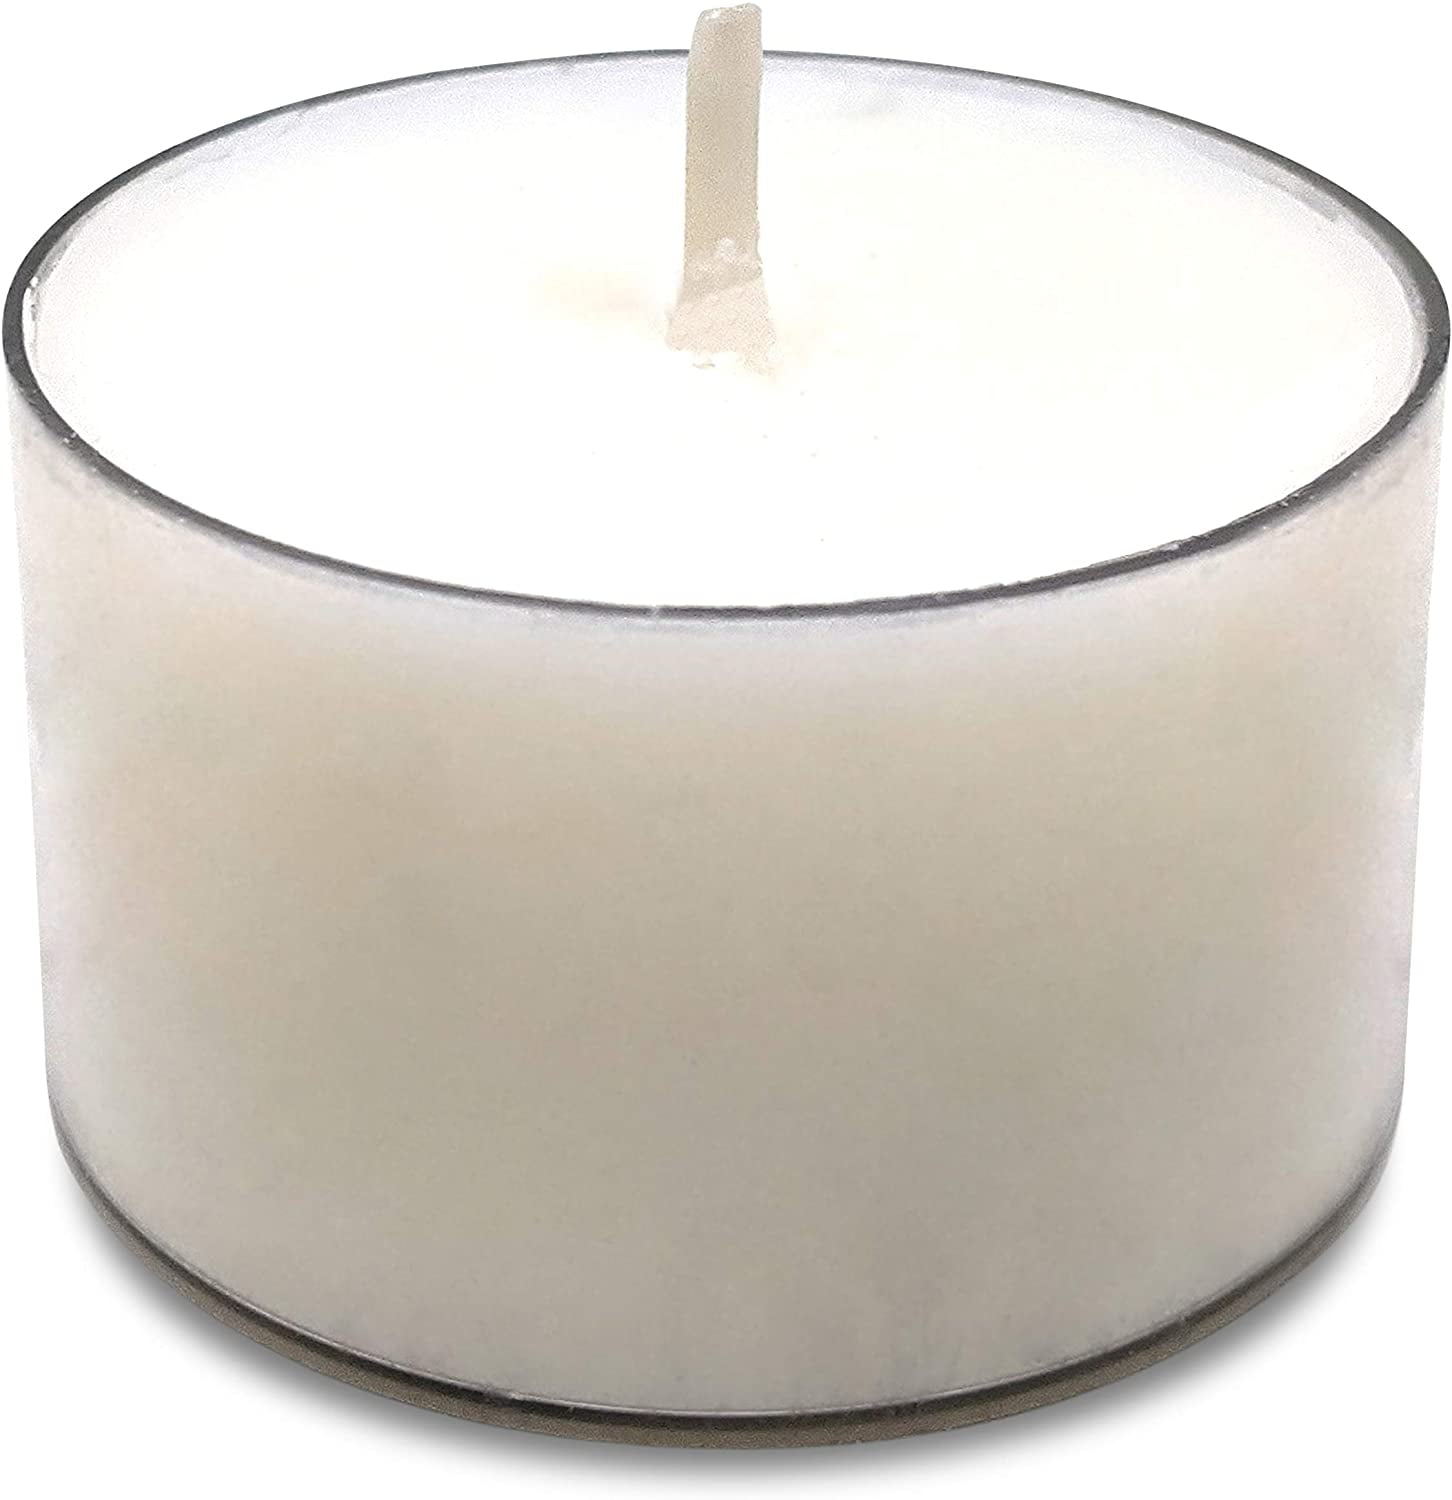 4HR x 50 Unscented Plain White Tea light Candles Non Scented Burner Aroma Relax 